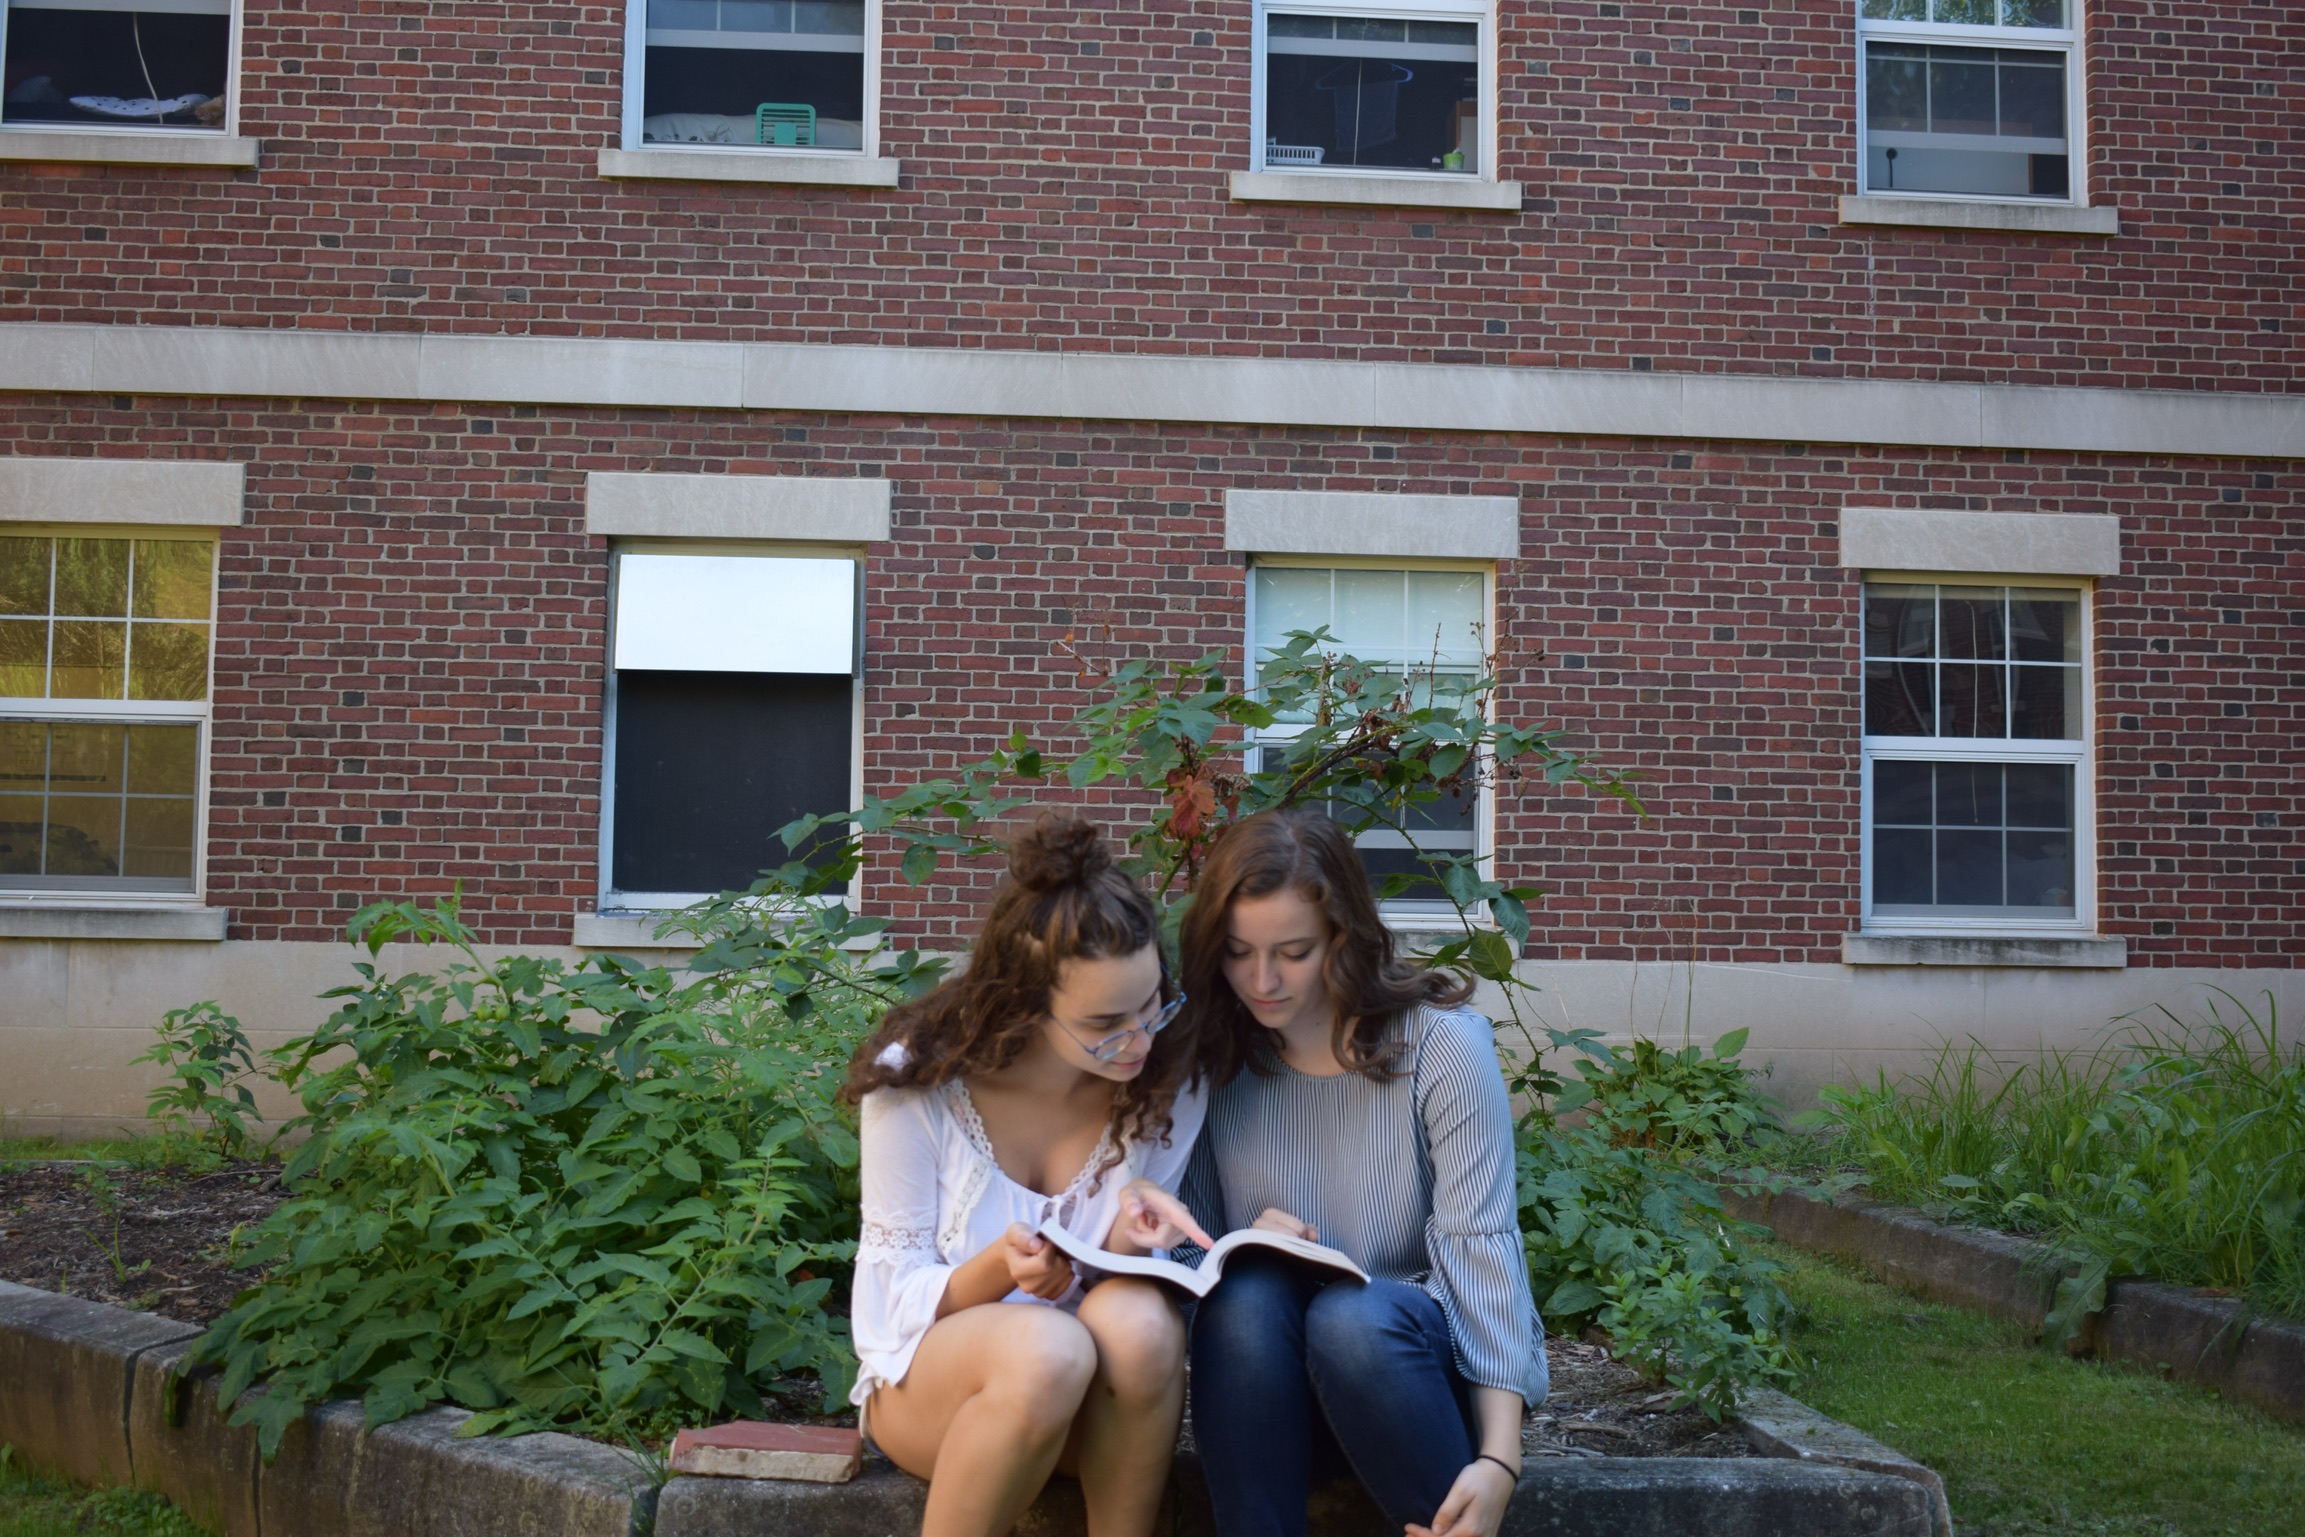 two girls share a book while sitting in a garden behind a brick building